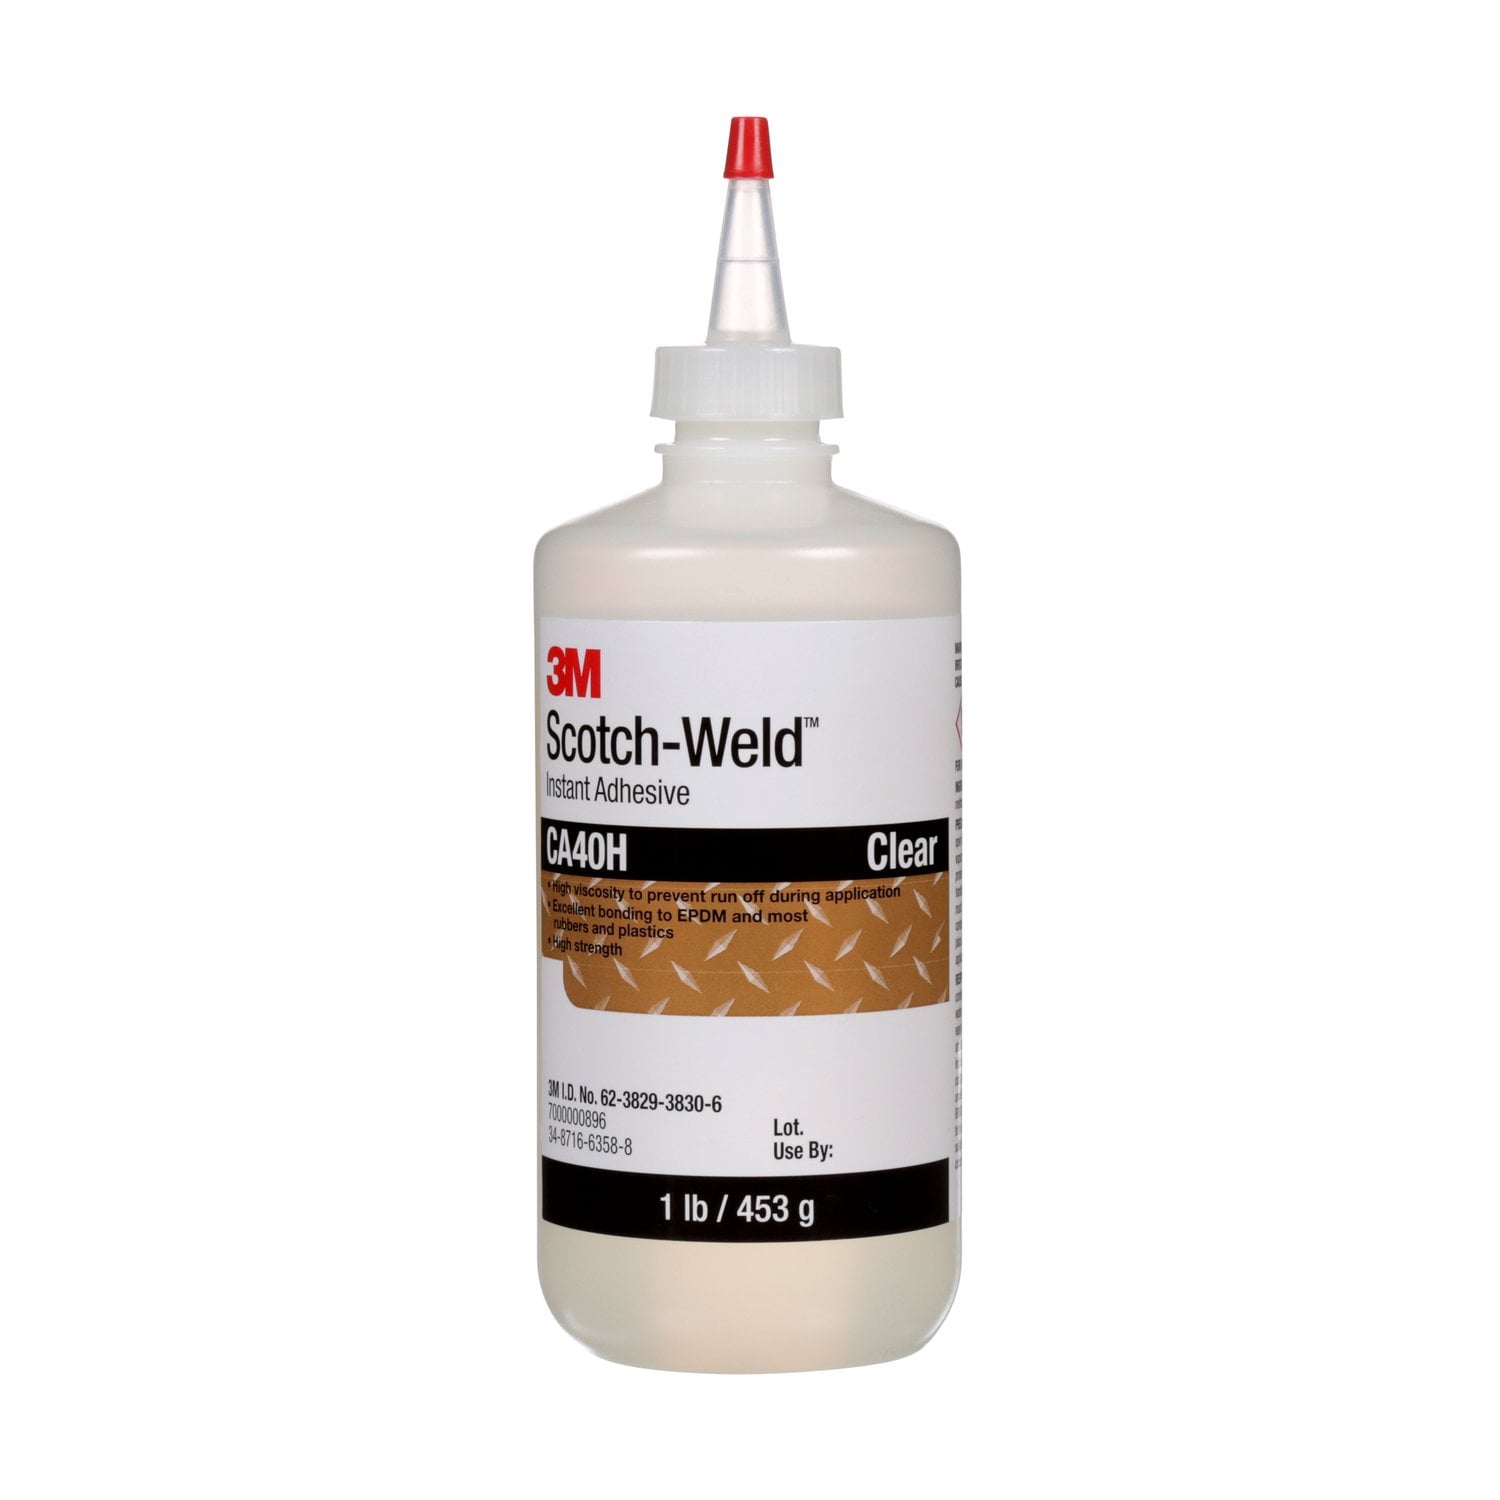 7000000896 - 3M Scotch-Weld Instant Adhesive CA40H, Clear, 1 Pound, 1 Bottle/Case